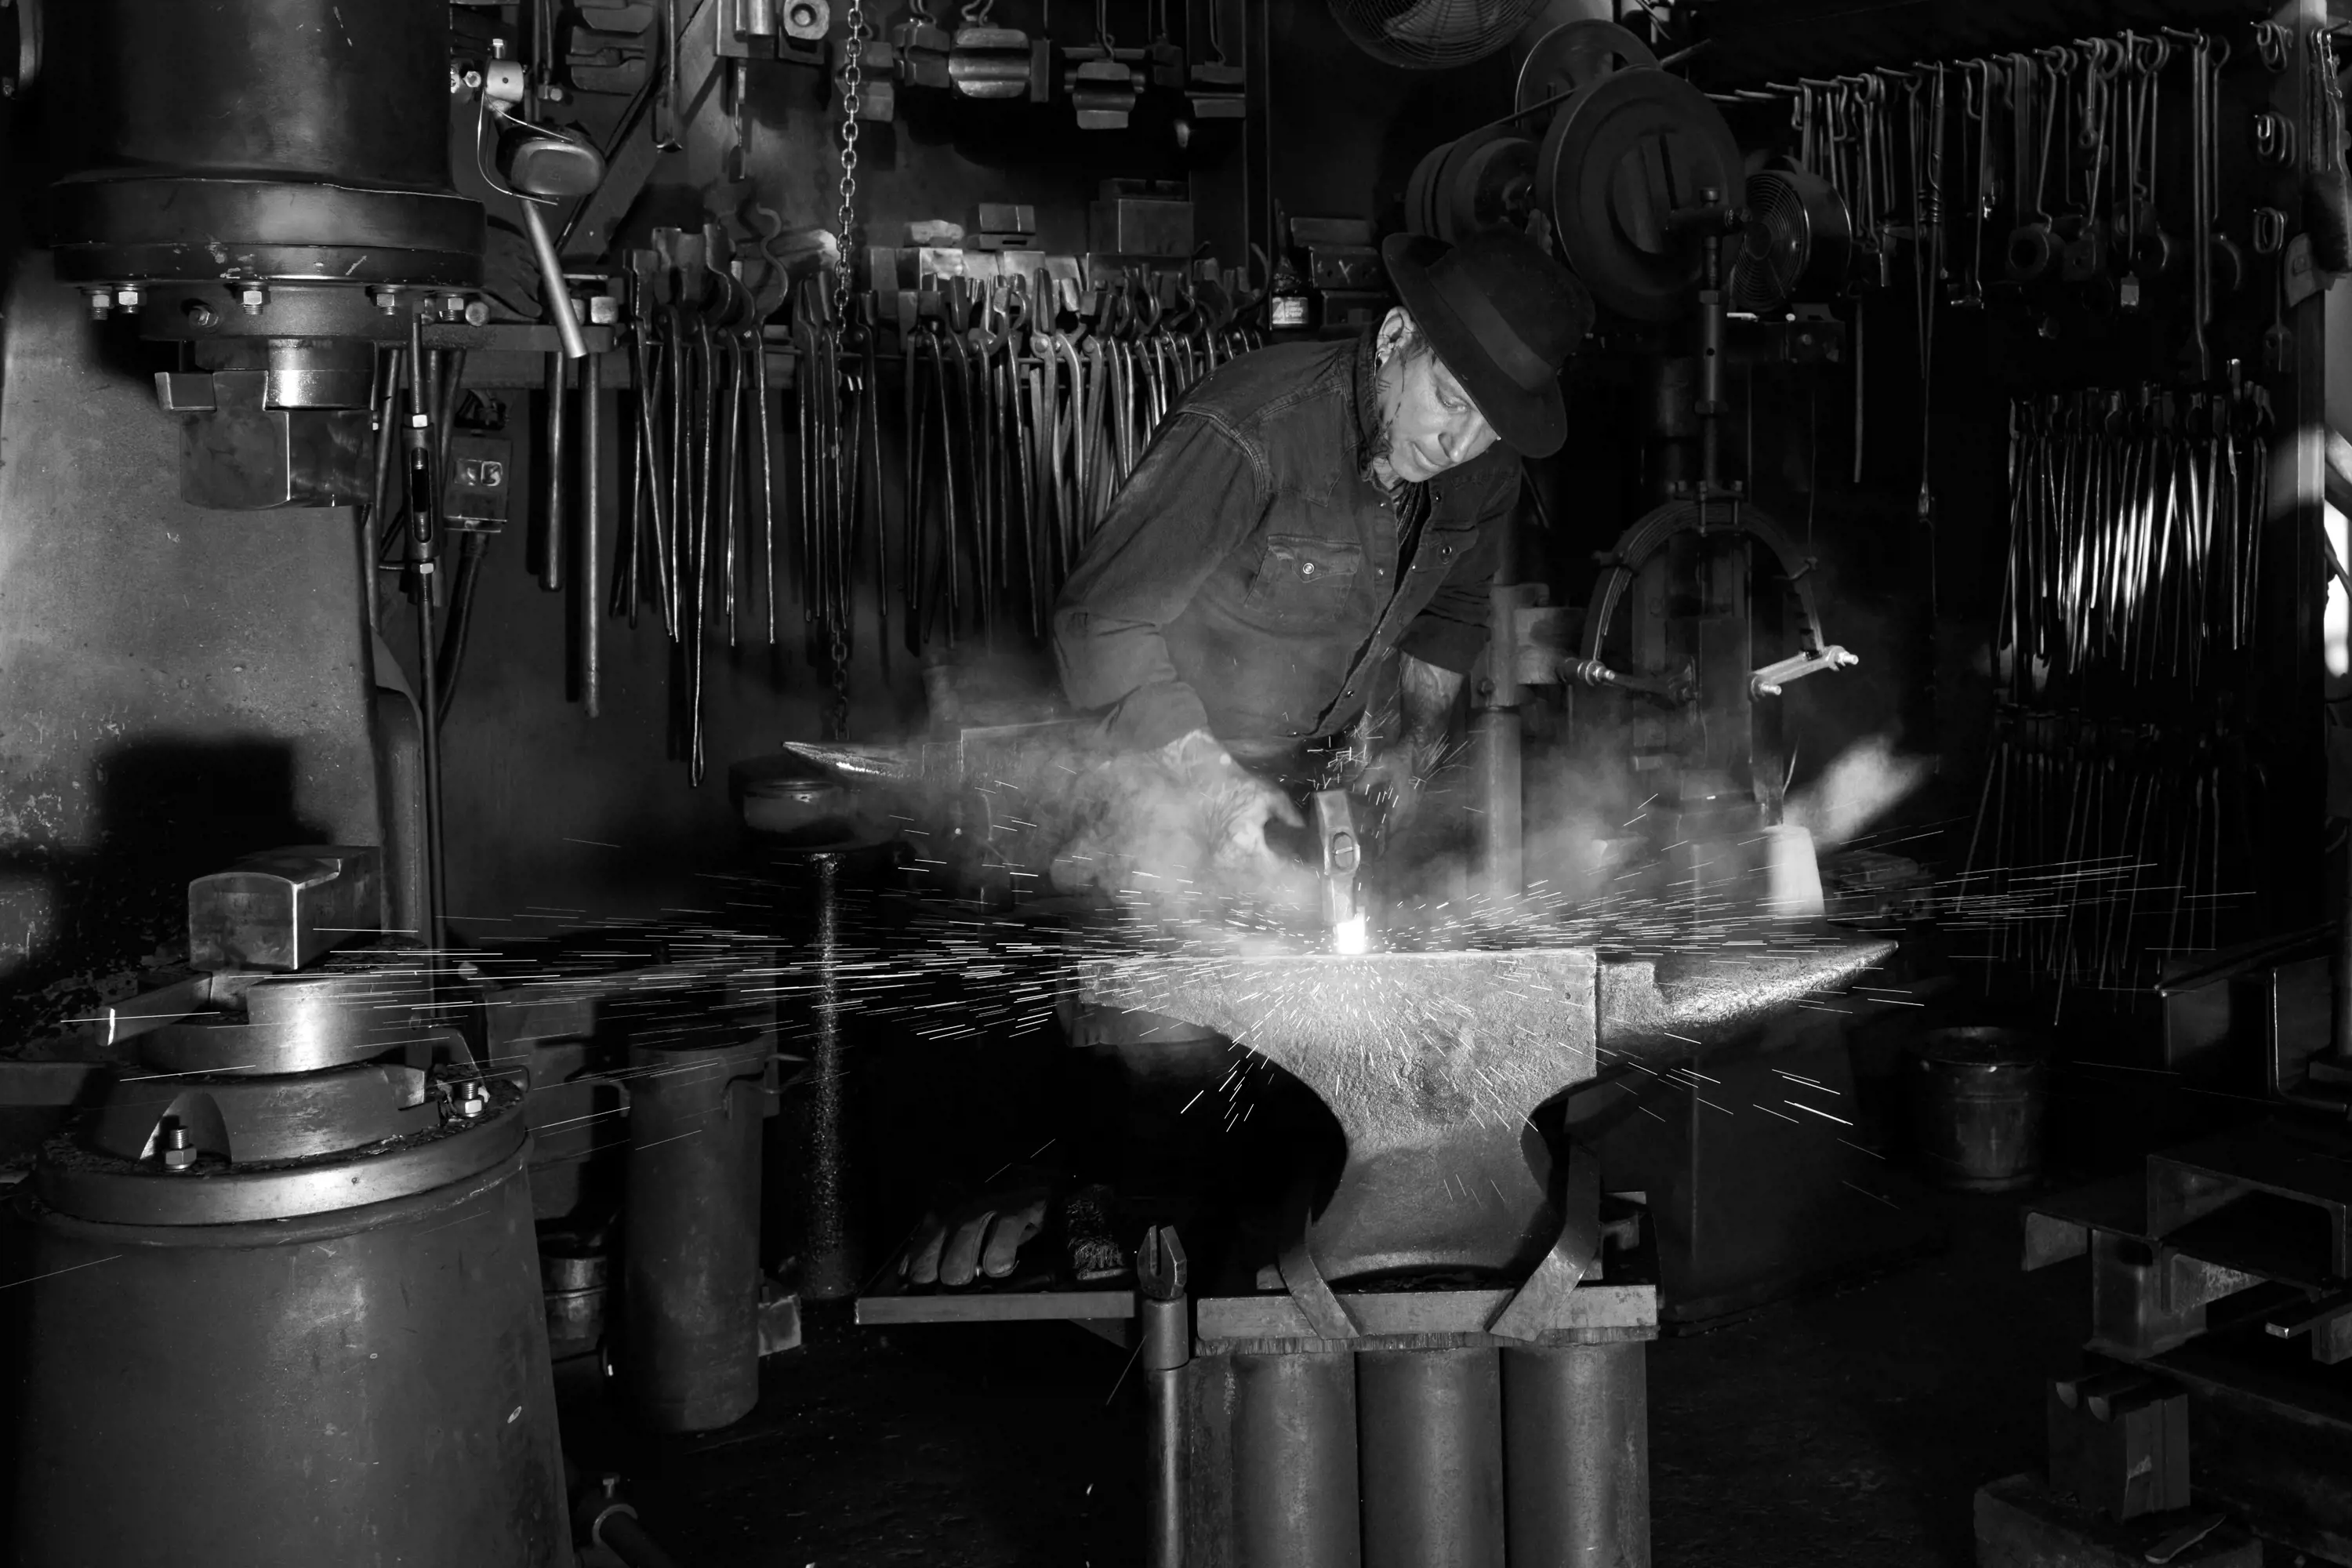 A man stands in the shadows of a metal workshop and hits hot steel on an anvil with a hammer. Sparks and smoke fill the air.